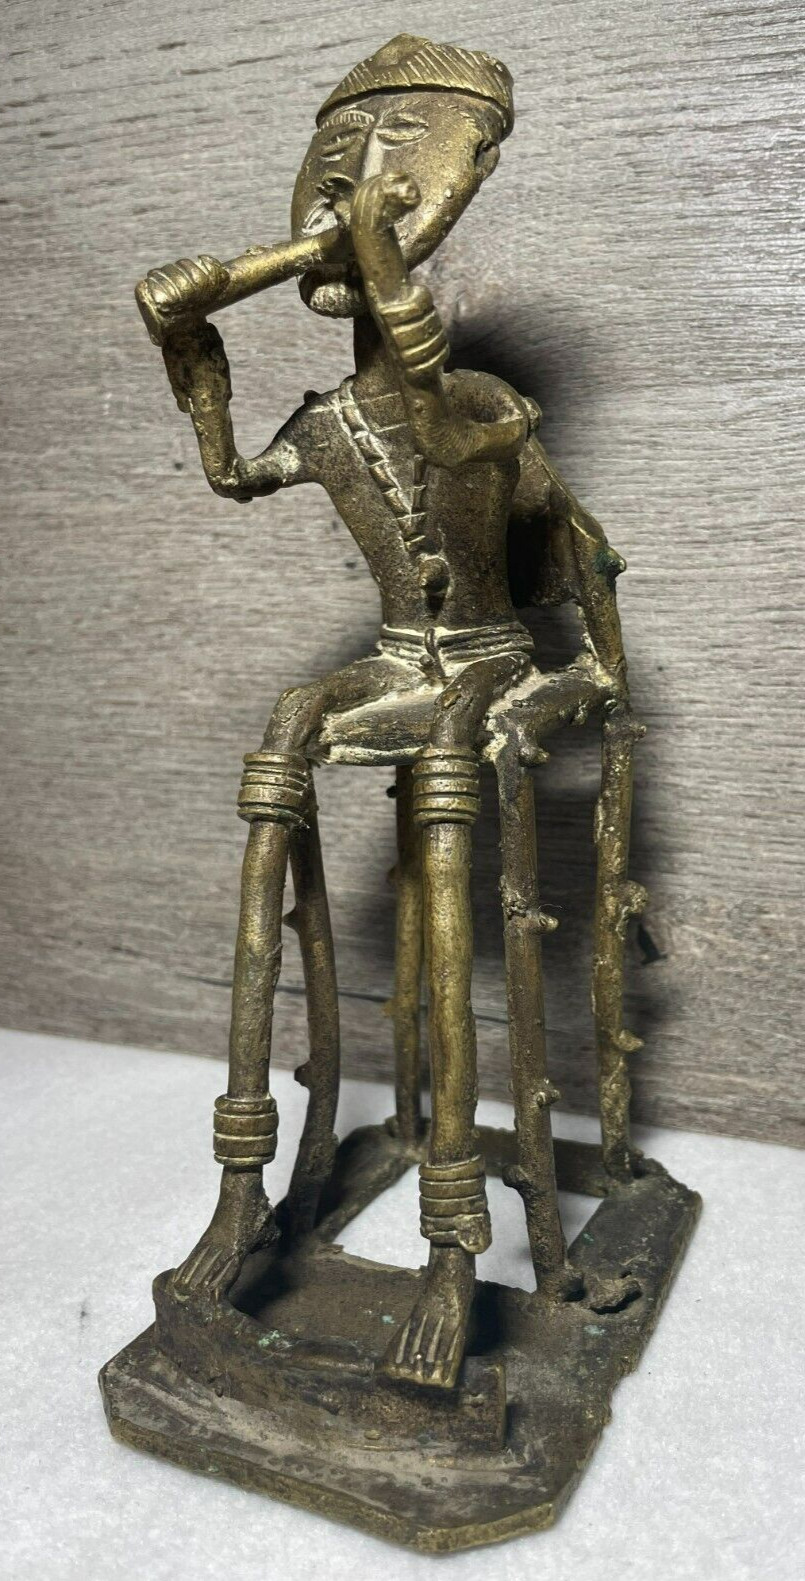 Unique Vintage VTG Brass Tribal Man in Chair Smoking Pipe or Playing Instrument